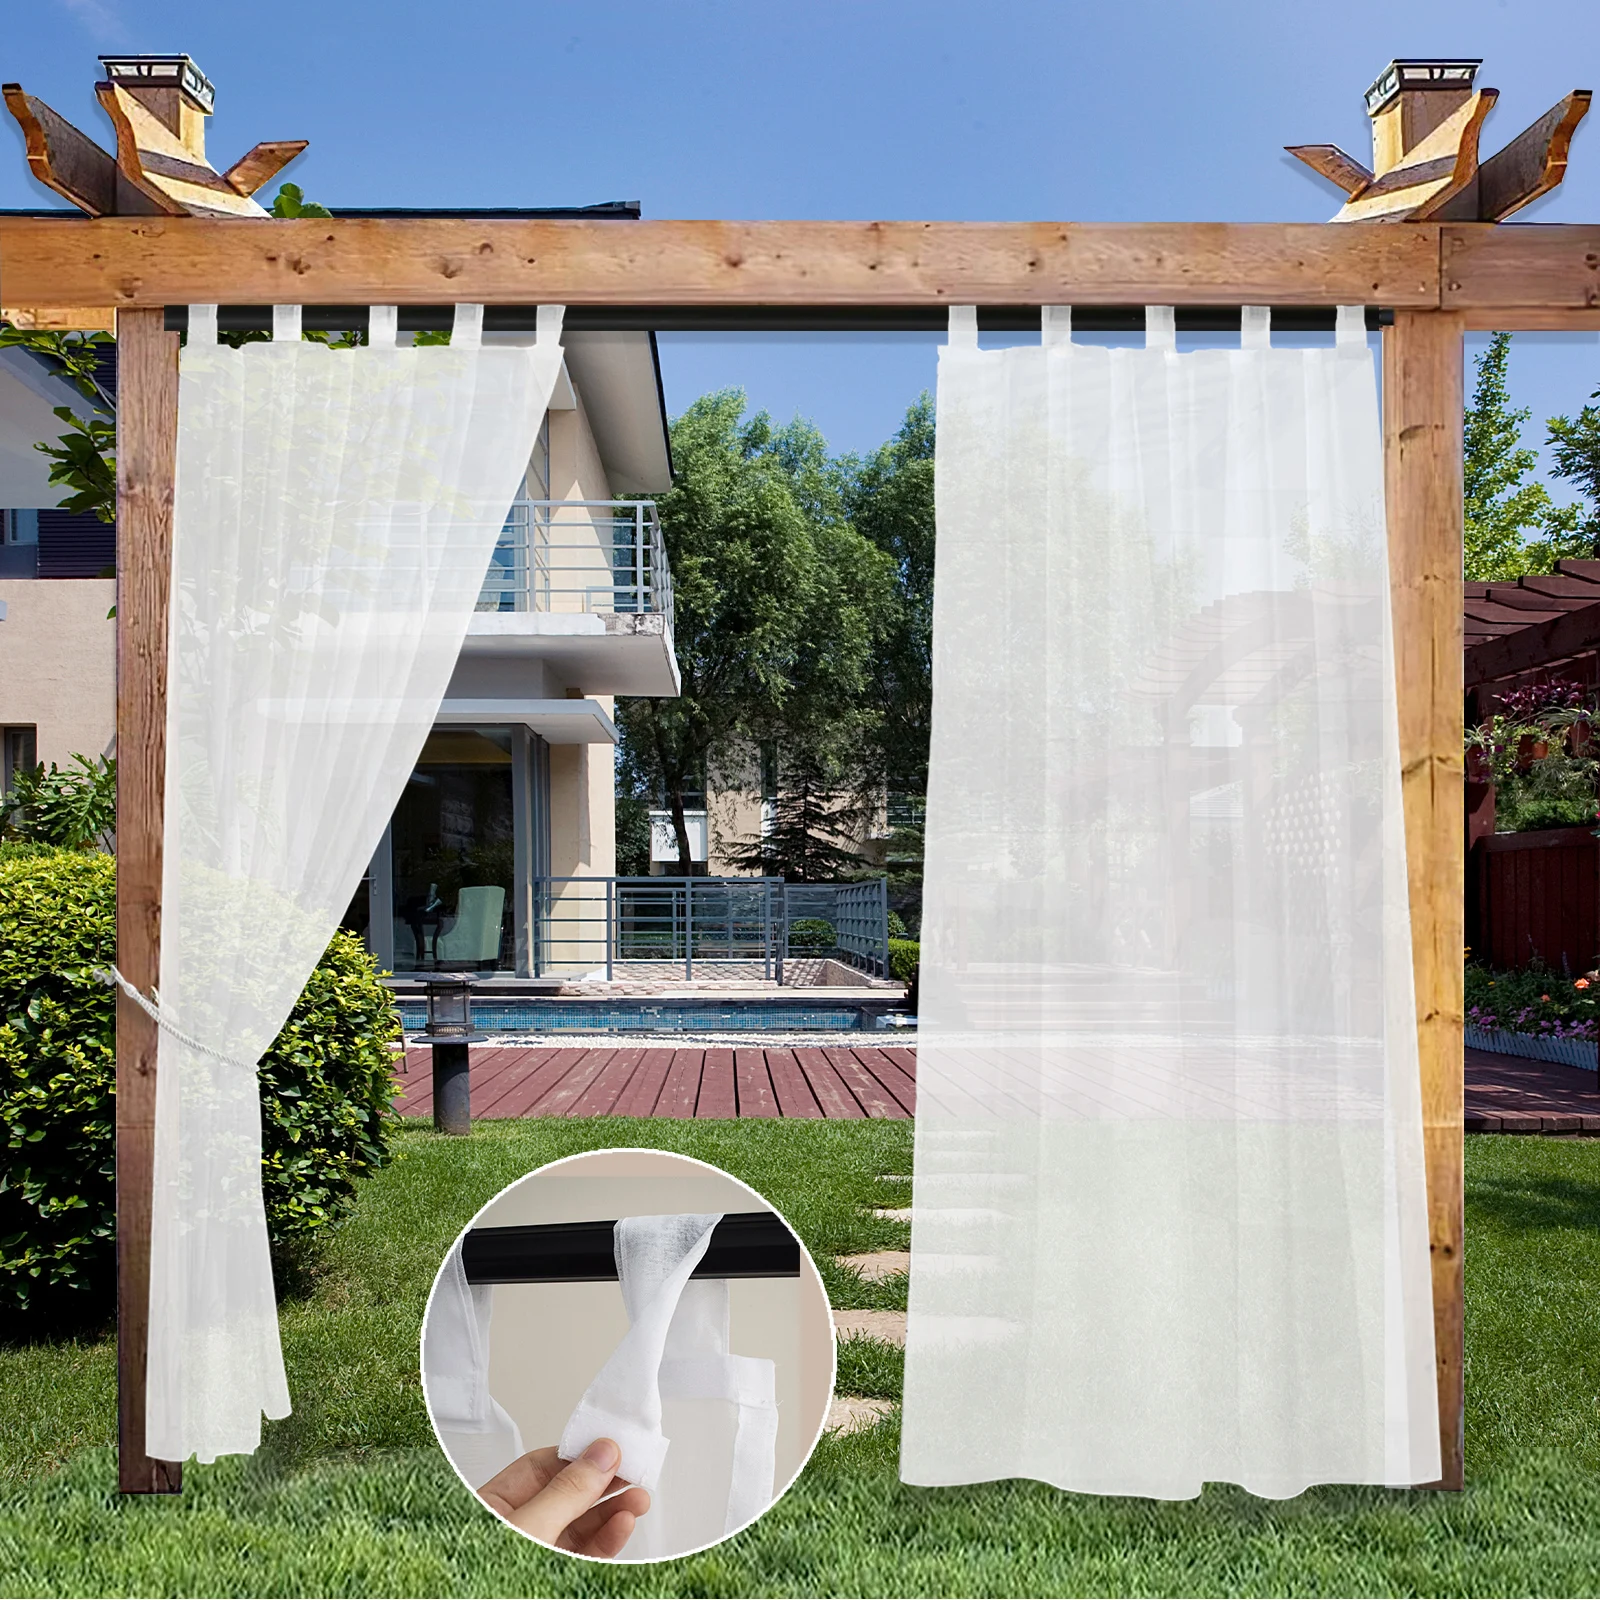 

Garden Waterproof Sheer Curtains Indoor Outdoor Tab Top Voile Net Window Drapes For Patio Pergola Cabana Decoration Tulle Panels